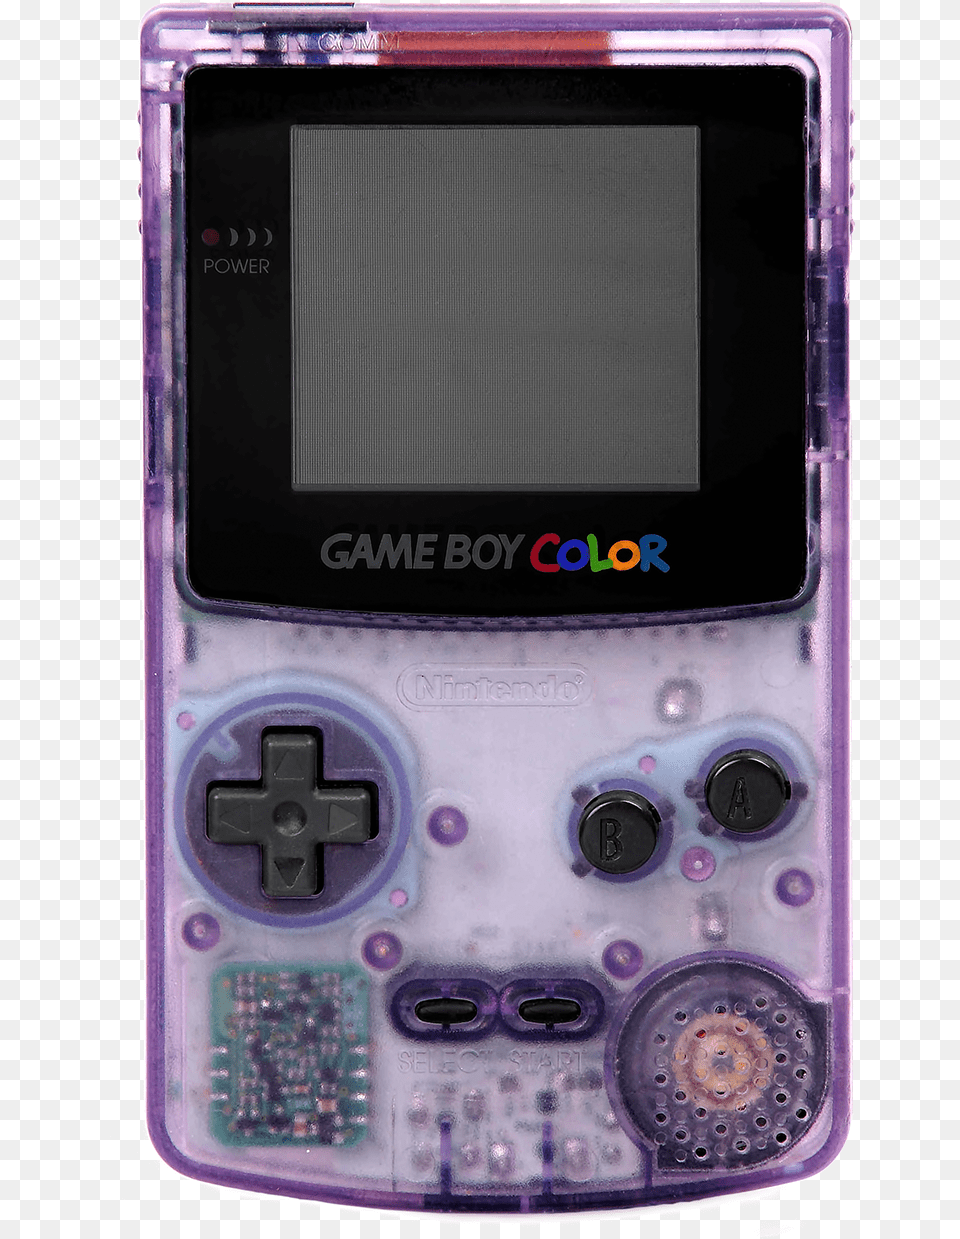 Gameboy Color, Electronics, Mobile Phone, Phone, Electrical Device Free Png